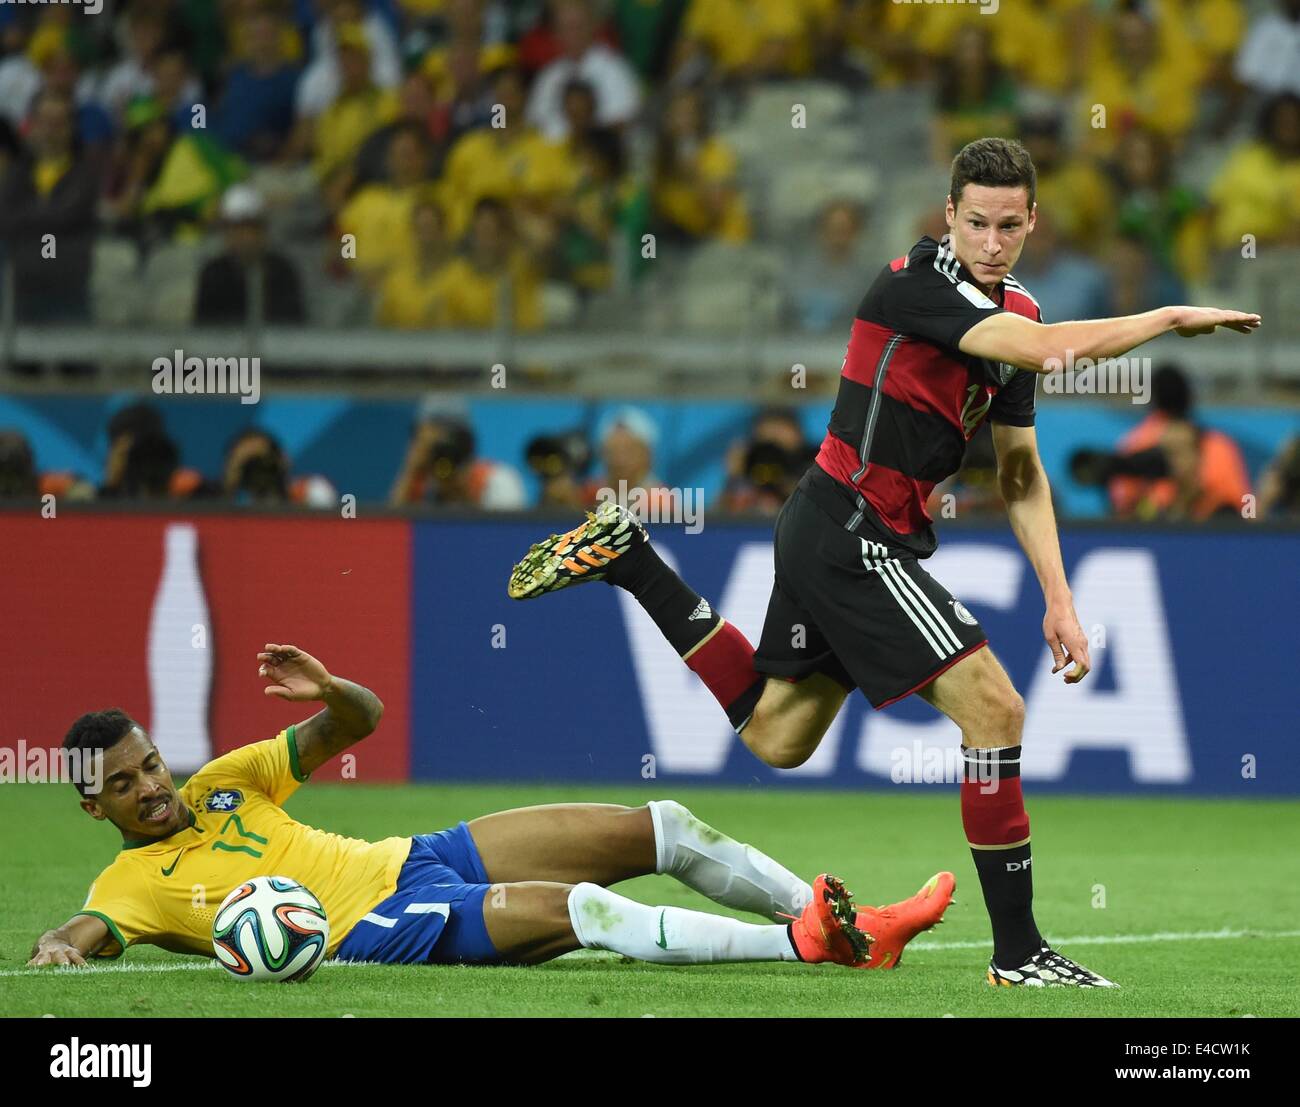 Belo Horizonte, Brazil. 8th July, 2014. Germany's Julian Draxler (R) vies with Brazil's Luiz Gustavo during a semifinal match between Brazil and Germany of 2014 FIFA World Cup at the Estadio Mineirao Stadium in Belo Horizonte, Brazil, on July 8, 2014. Germany won 7-1 over Brazil and qualified for the final on Tuesday. Credit:  Liu Dawei/Xinhua/Alamy Live News Stock Photo